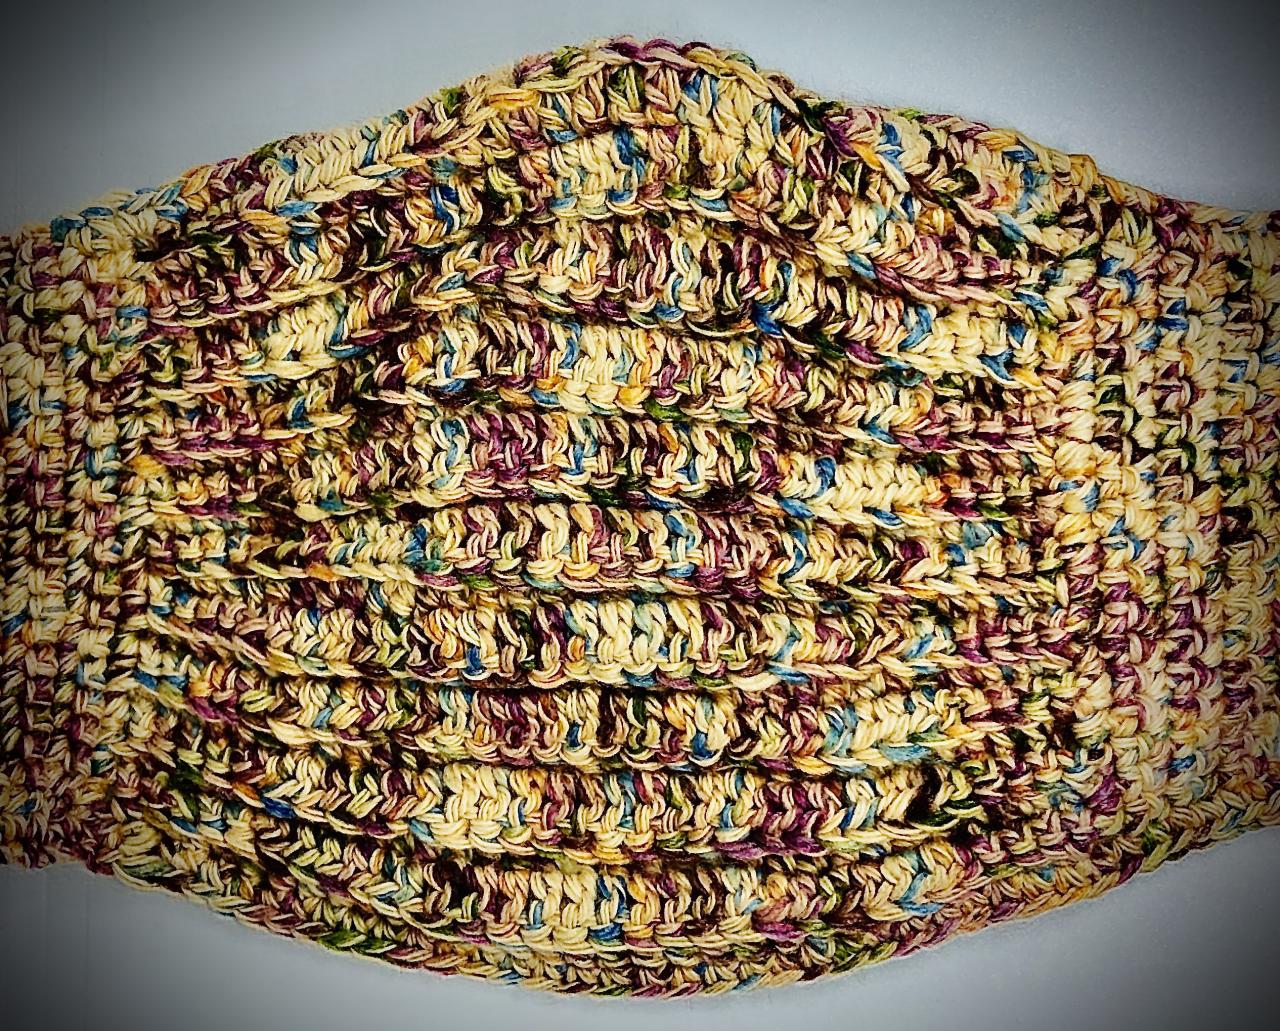 Crochet Cotton/acrylic Adult Face Mask, Mixed Brown And Yellow Colors, Face Covering, Machine-washable, Ready To Ship